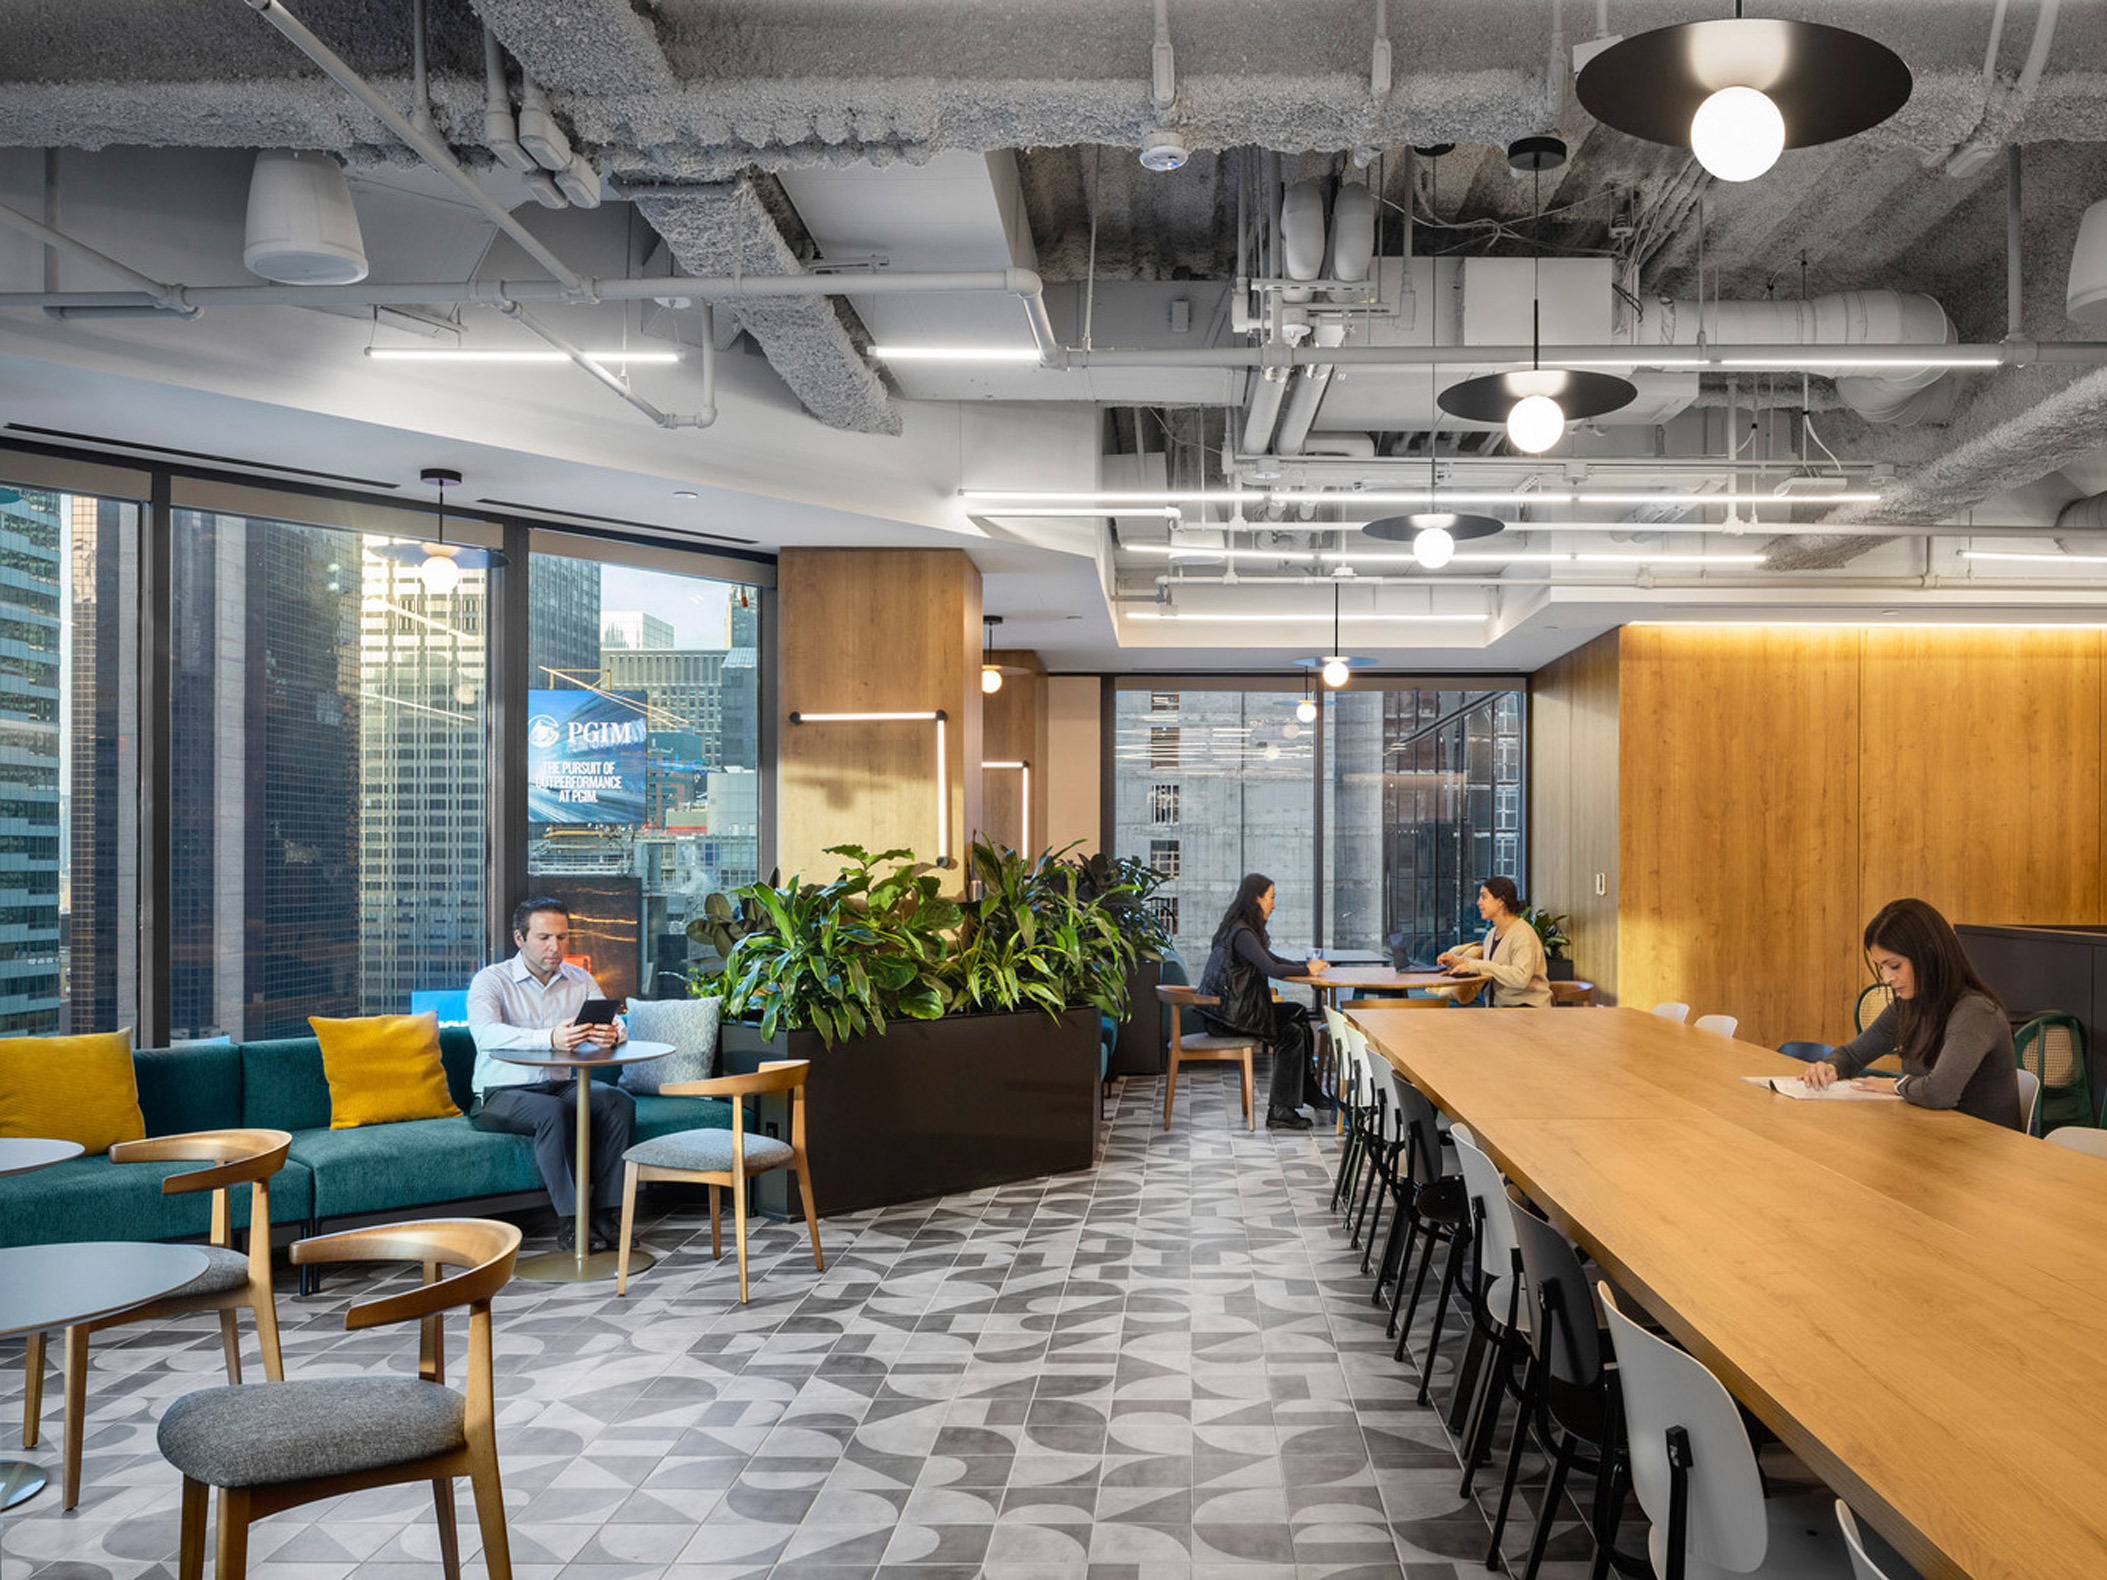 A modern office break room featuring a geometric-patterned floor, various seating options including bar-height tables and plush couches, accented by vibrant furnishings and ample greenery, bordered by floor-to-ceiling windows overlooking an urban landscape.